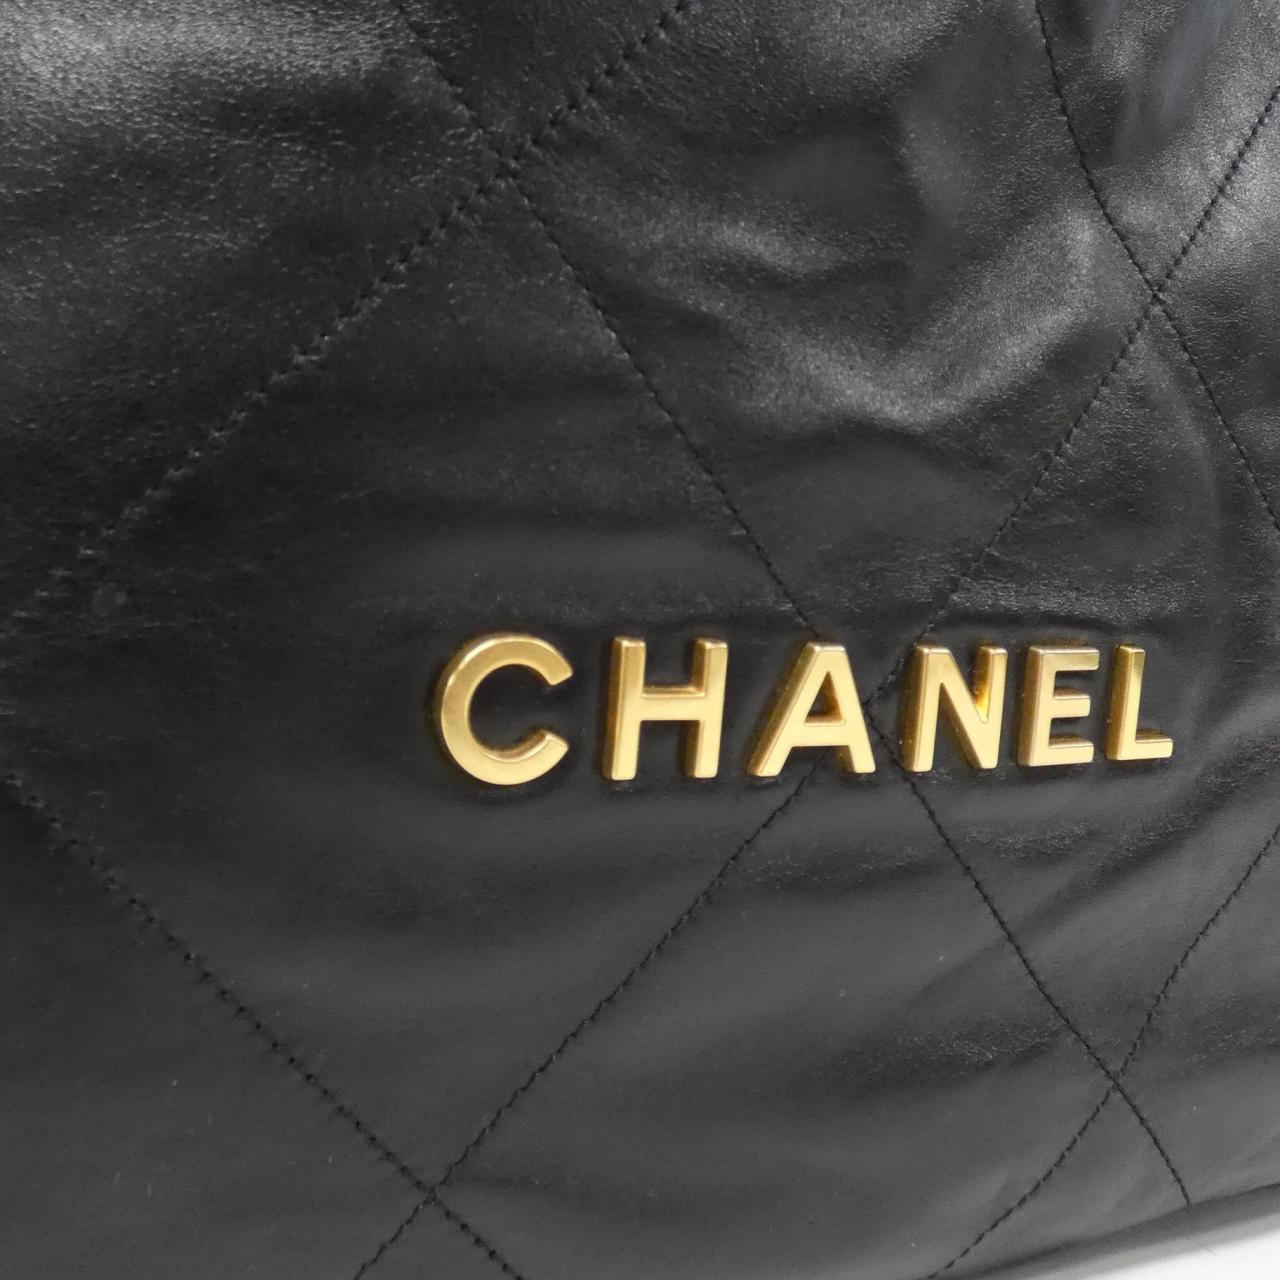 CHANEL CHANEL 22 line AS3313 rucksack